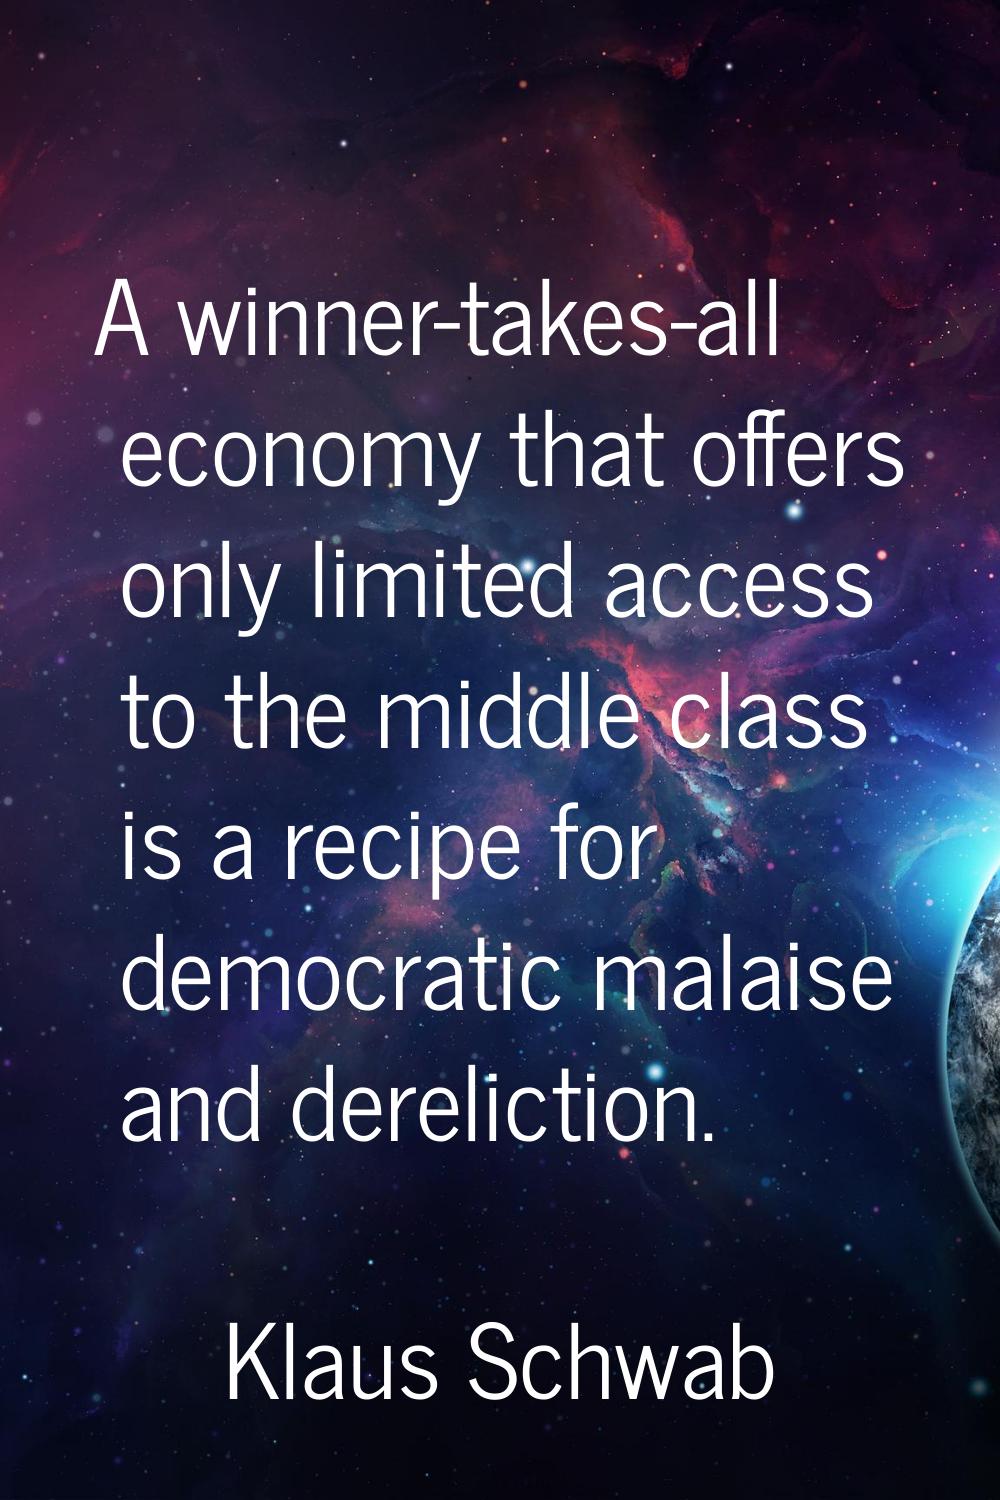 A winner-takes-all economy that offers only limited access to the middle class is a recipe for demo